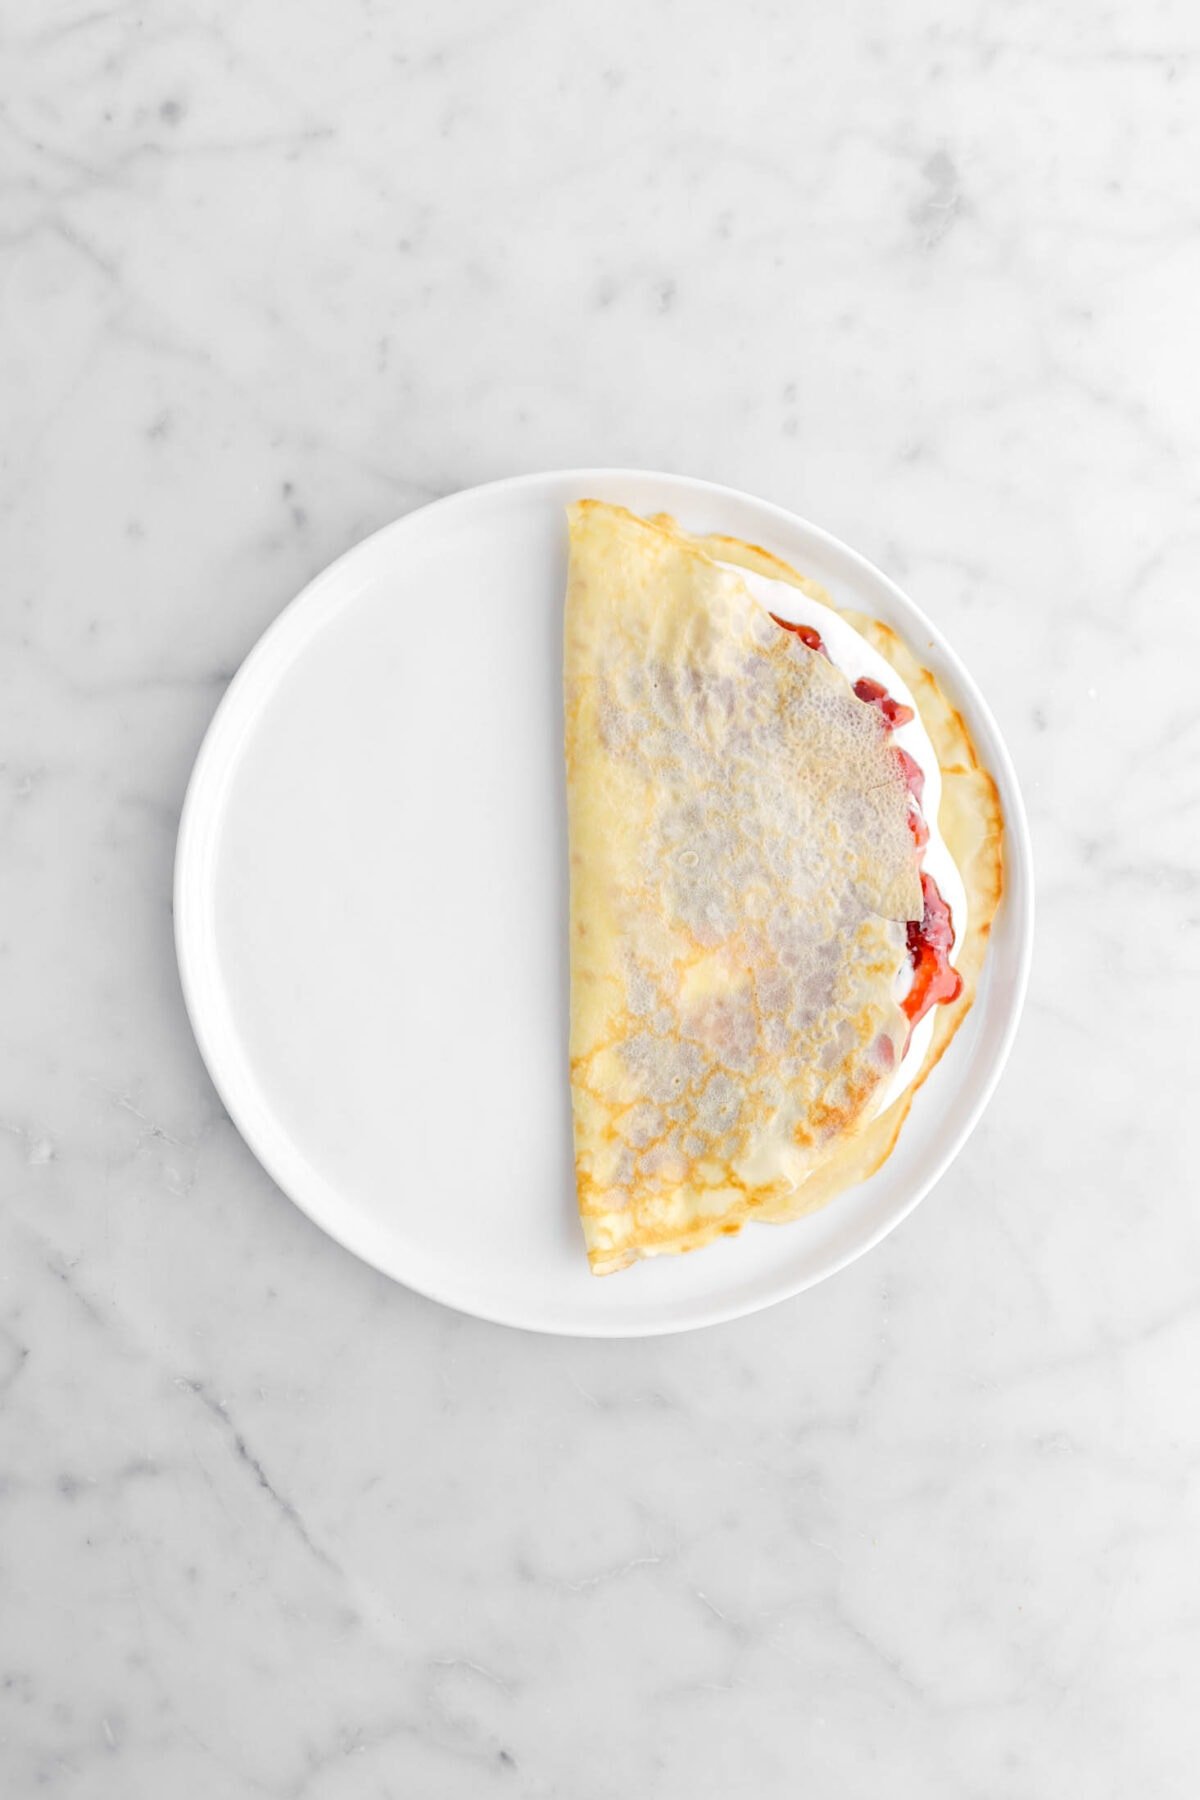 crepe folded over cream and jam.